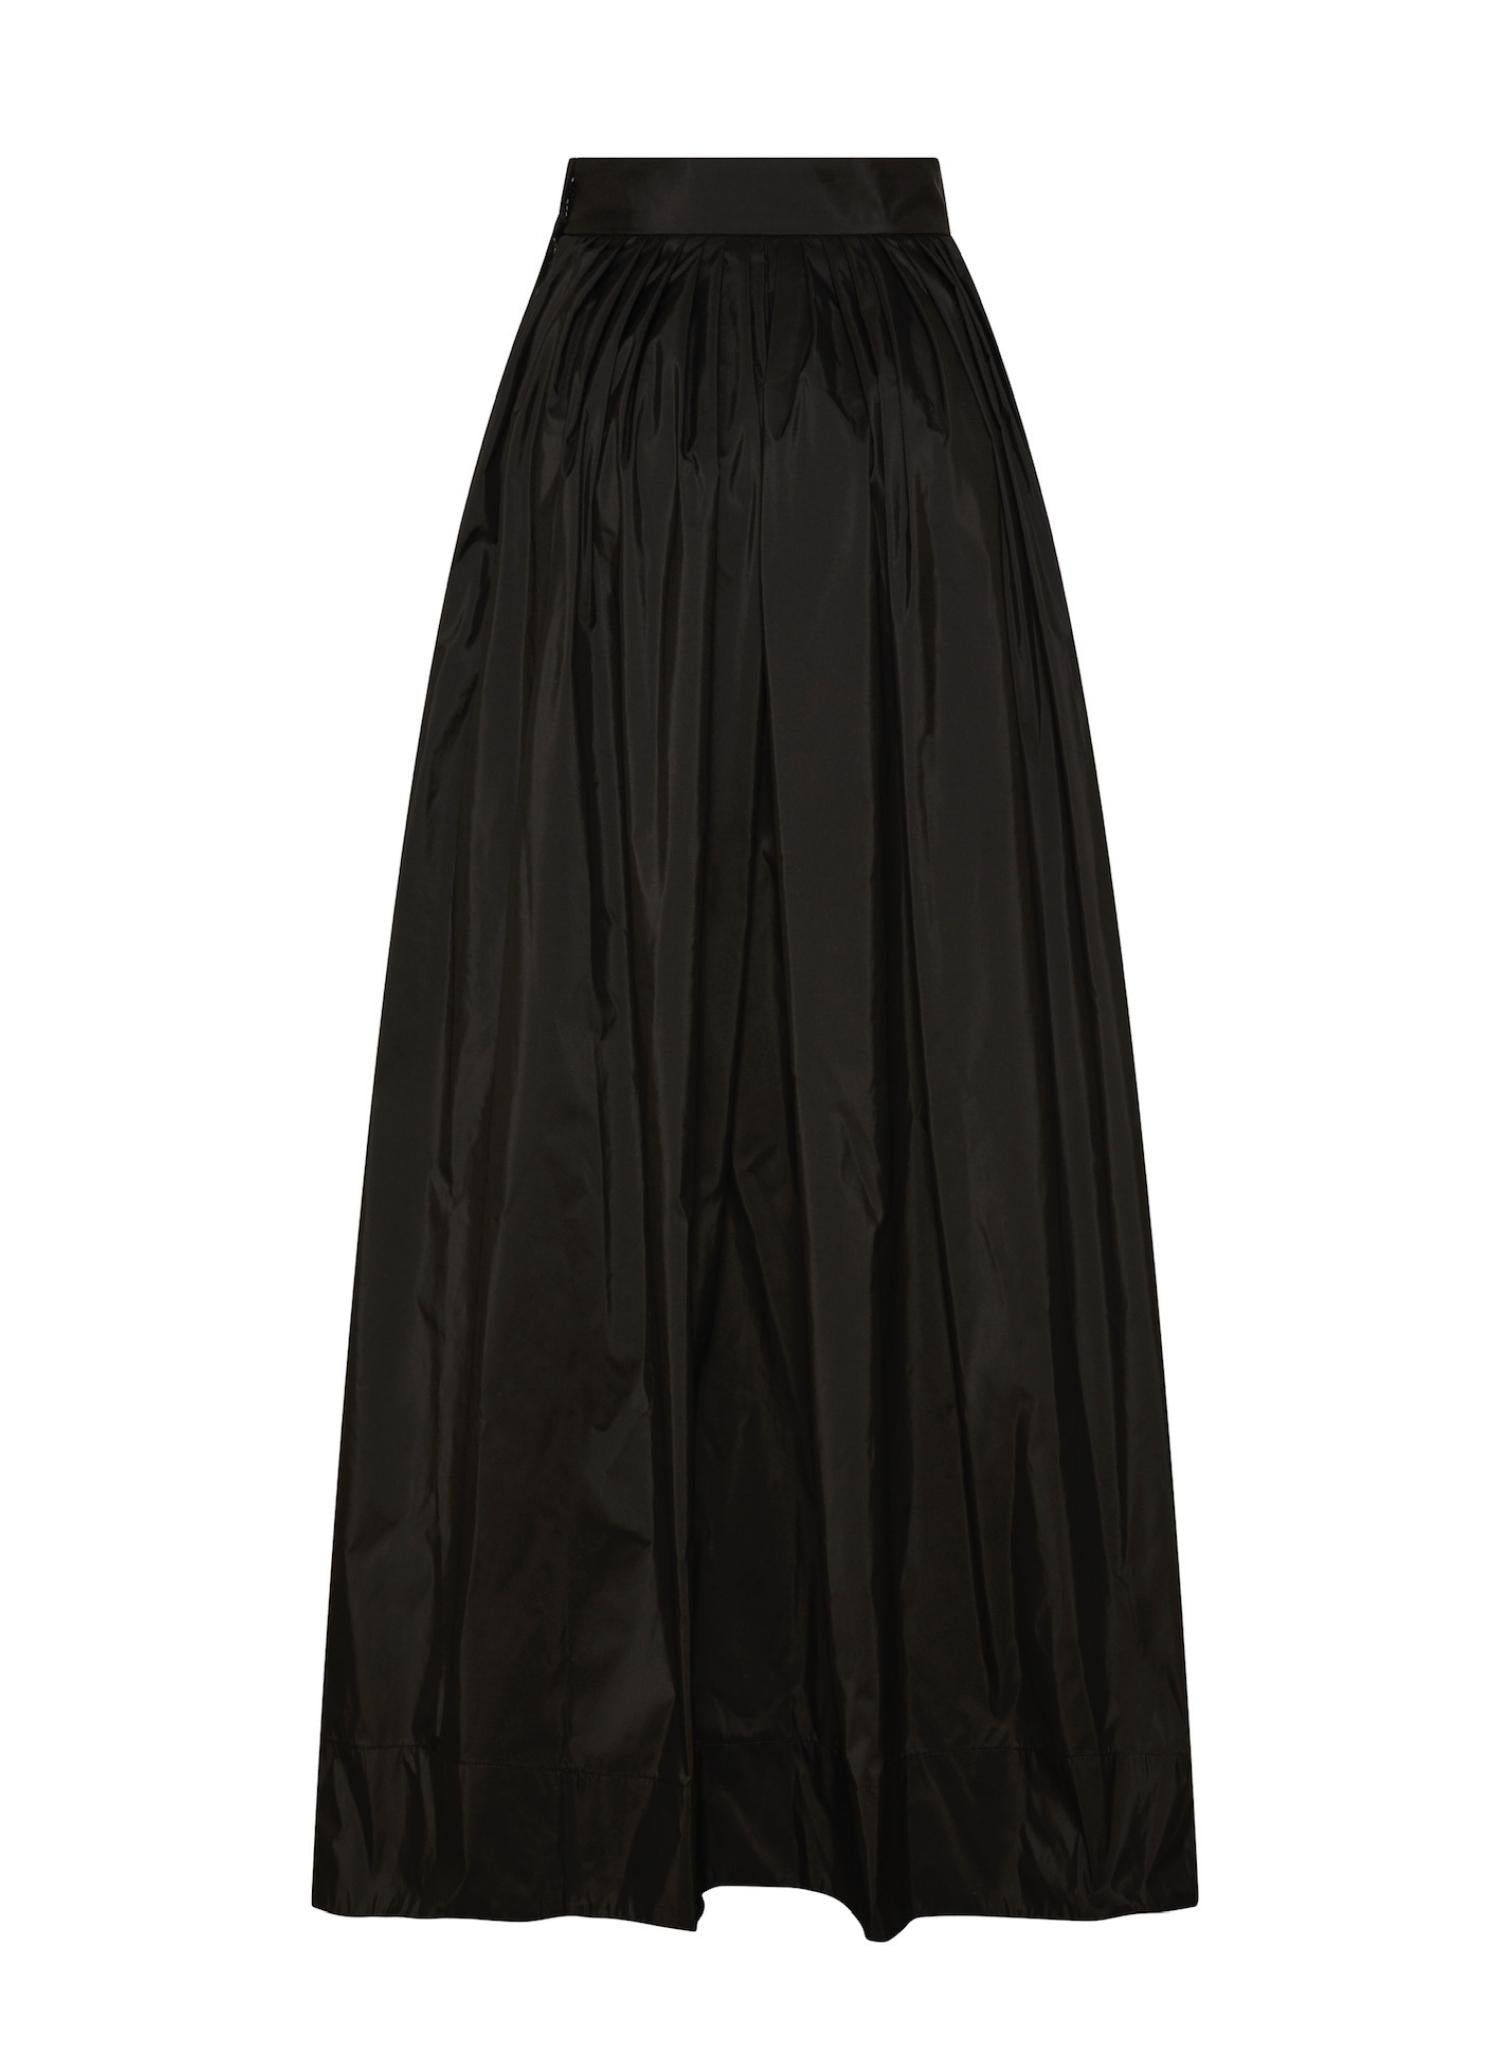 Womens Black Tafeta Maxi Ball Skirt with cinched waist and pockets